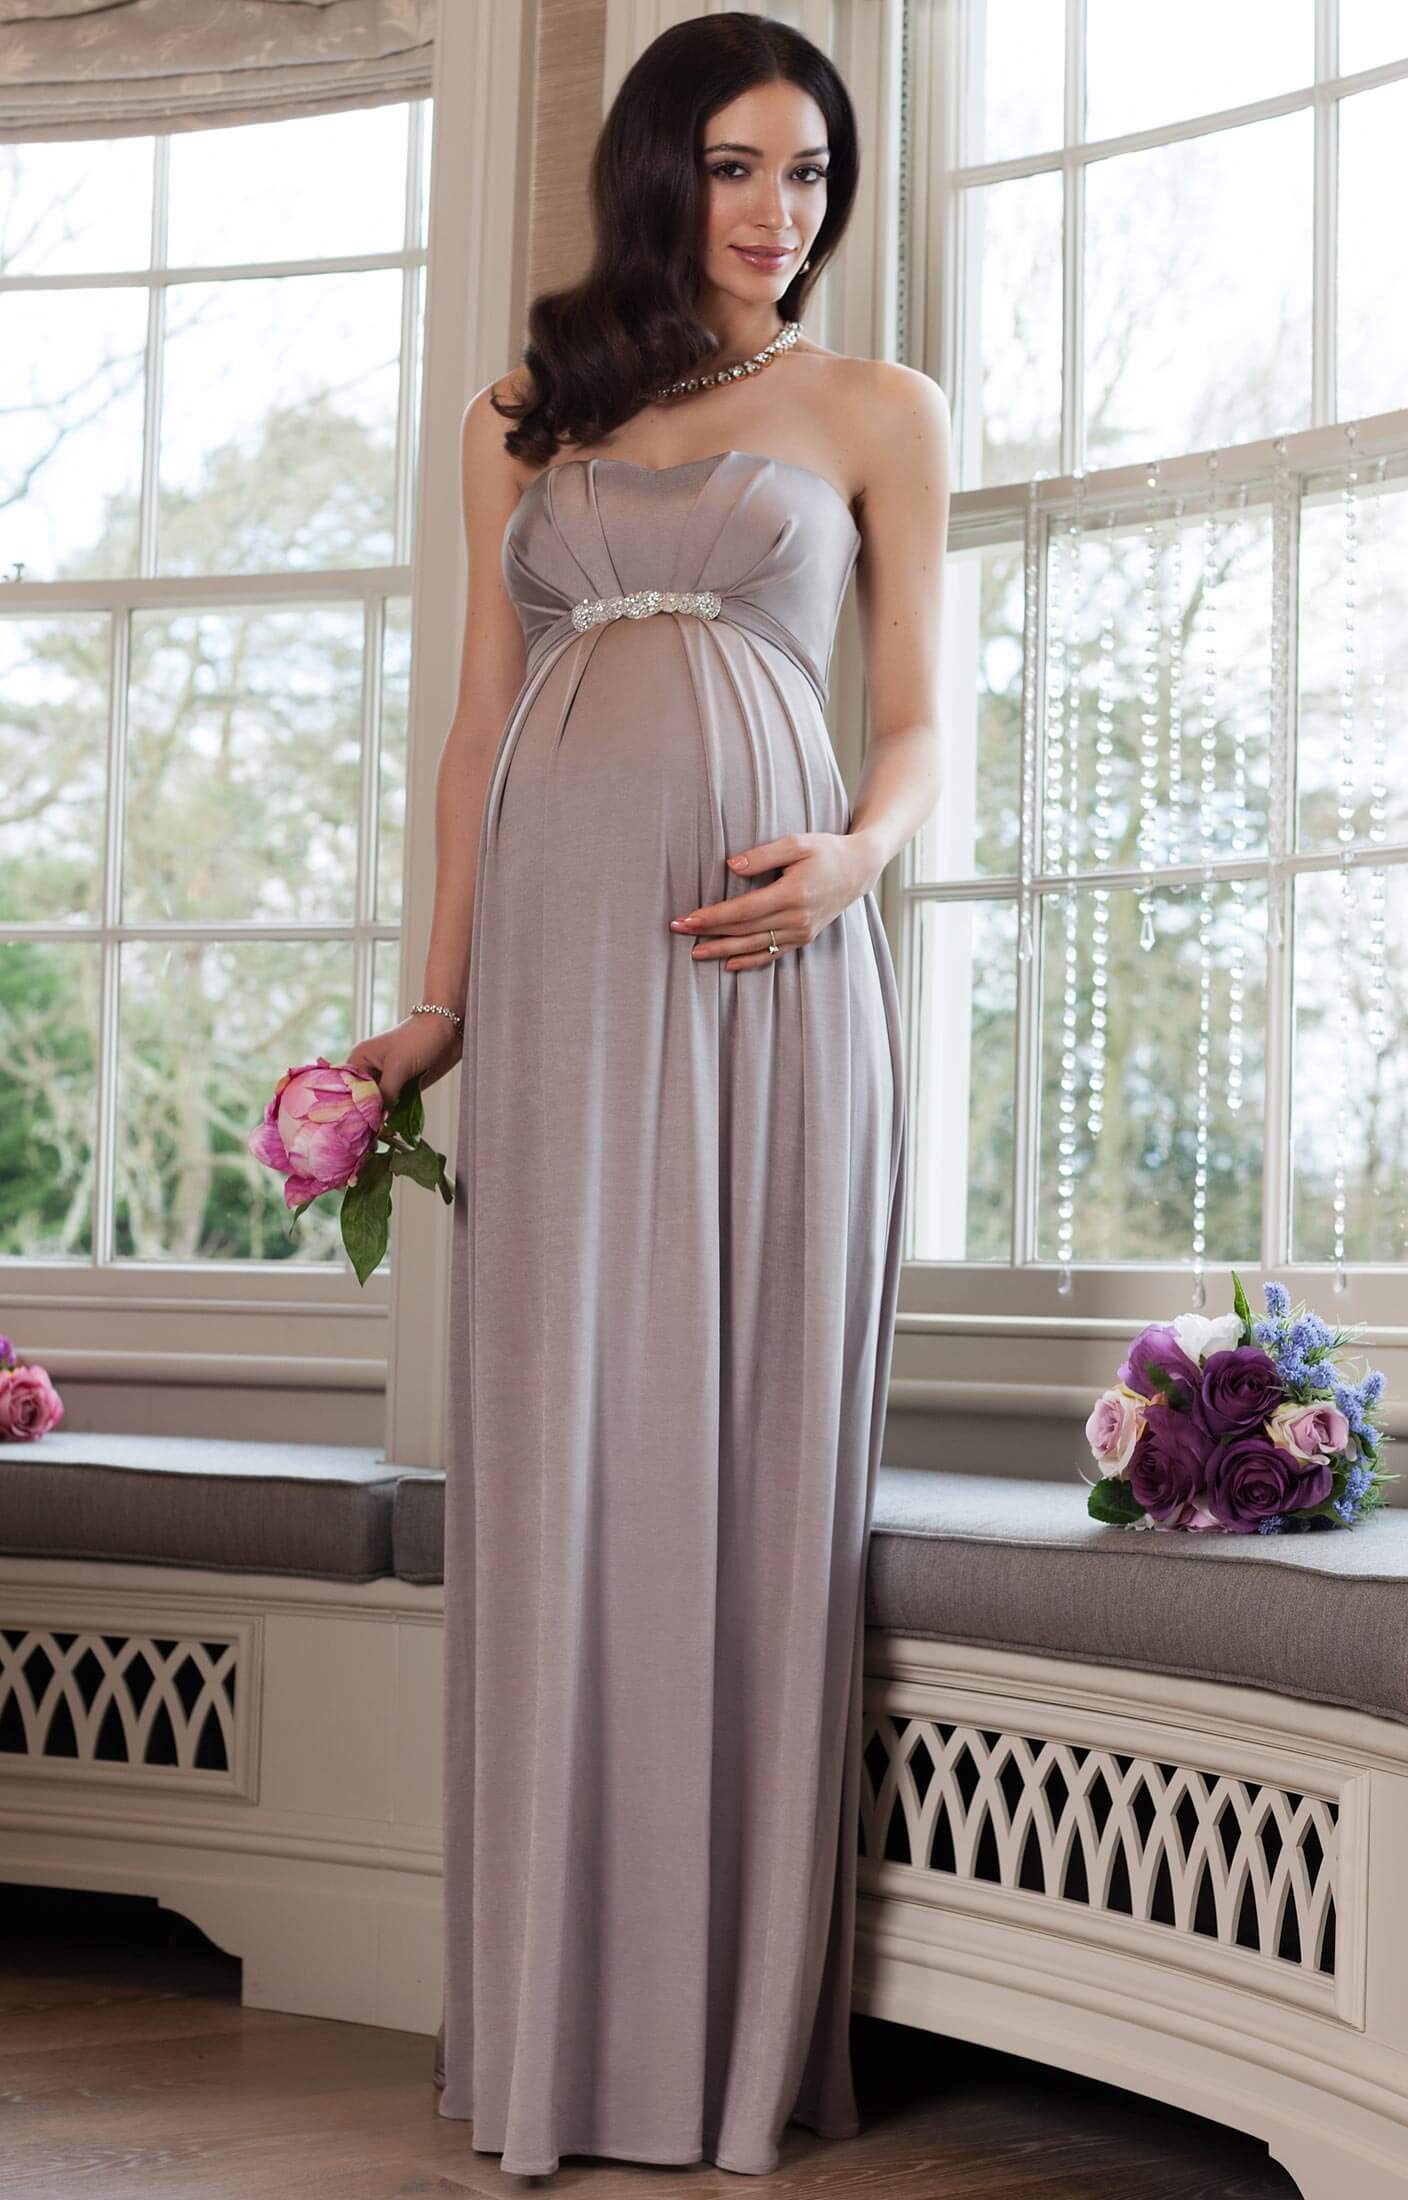 Annabella maternity gown cappuccino - Maternity Wedding Dresses ...